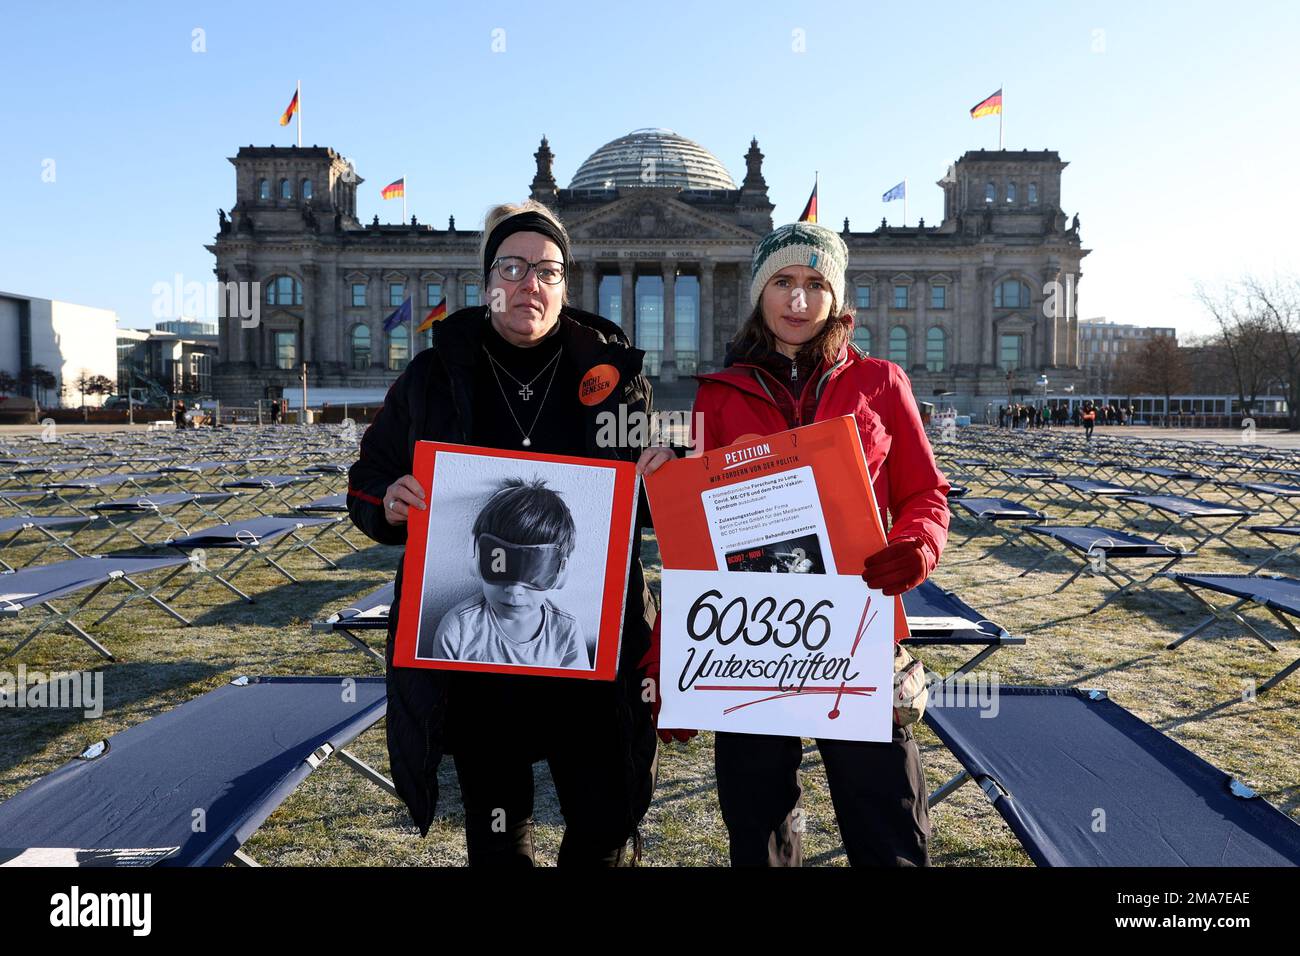 19 January 2023, Berlin: Ricarda Piepenhagen (l) and Elena Lierck demonstrate on behalf of LongCovid and ME/CFS sufferers in front of the Reichstag building. 400 cots with portraits of people affected from all over Germany have been set up on the lawn in front of the Reichstag building. A petition with over 60,000 signatures addressed to the German government will also be presented. The signatories are calling for the expansion of research and care structures. Therapy and medicine studies are needed, said initiator and applicant Piepenhagen. Photo: Joerg Carstensen/dpa Stock Photo